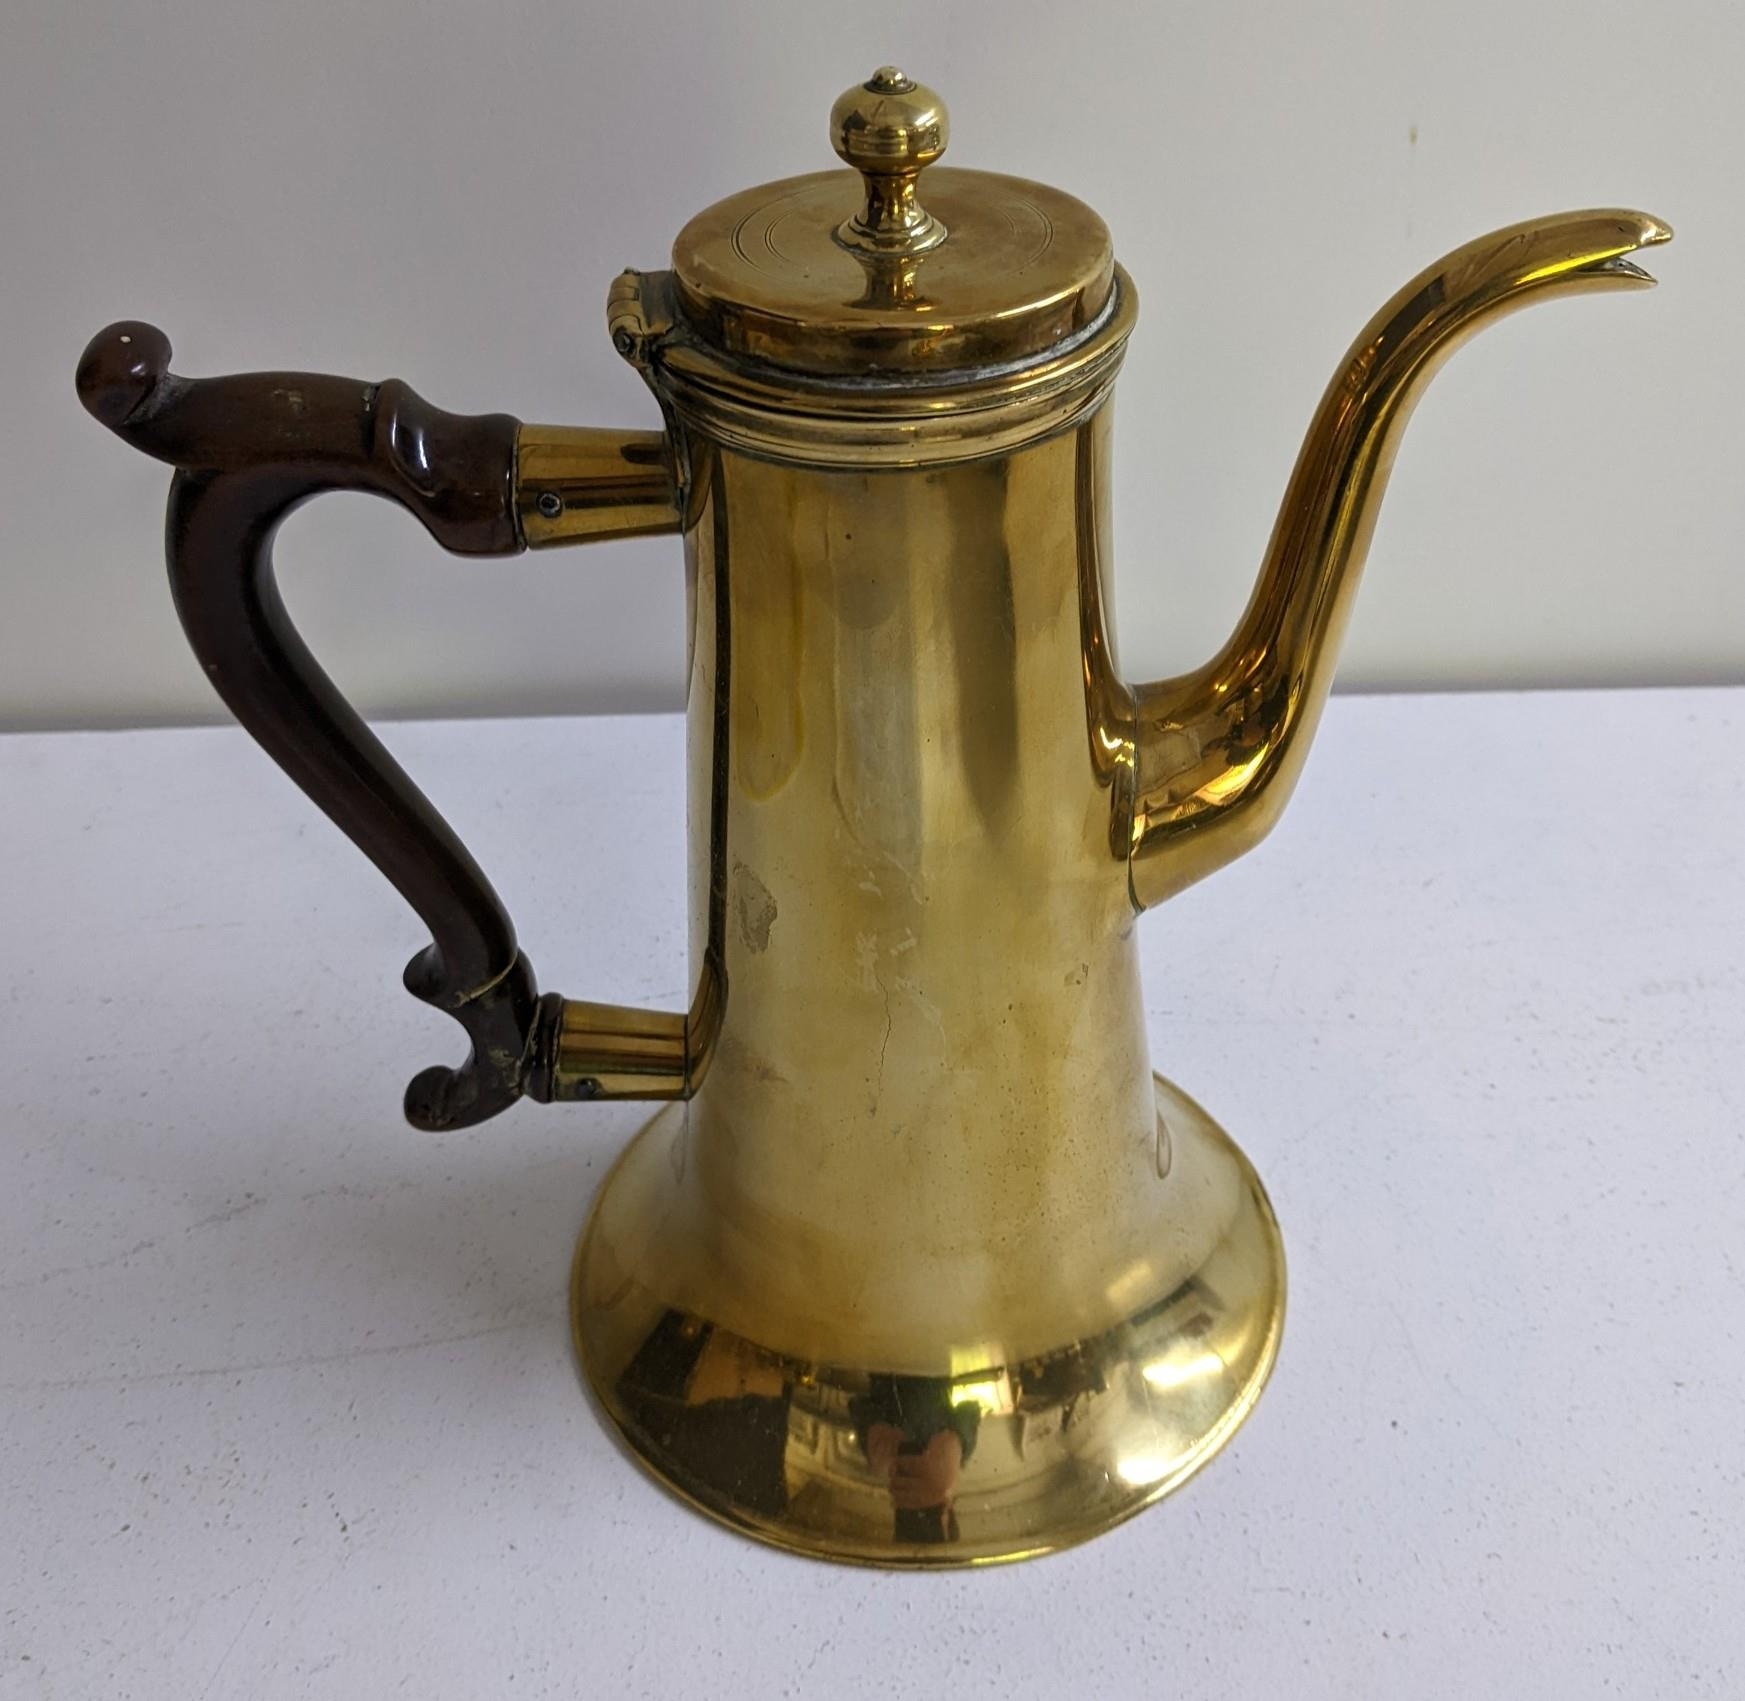 A 19th century brass coffee pot with turned timber handle Location: